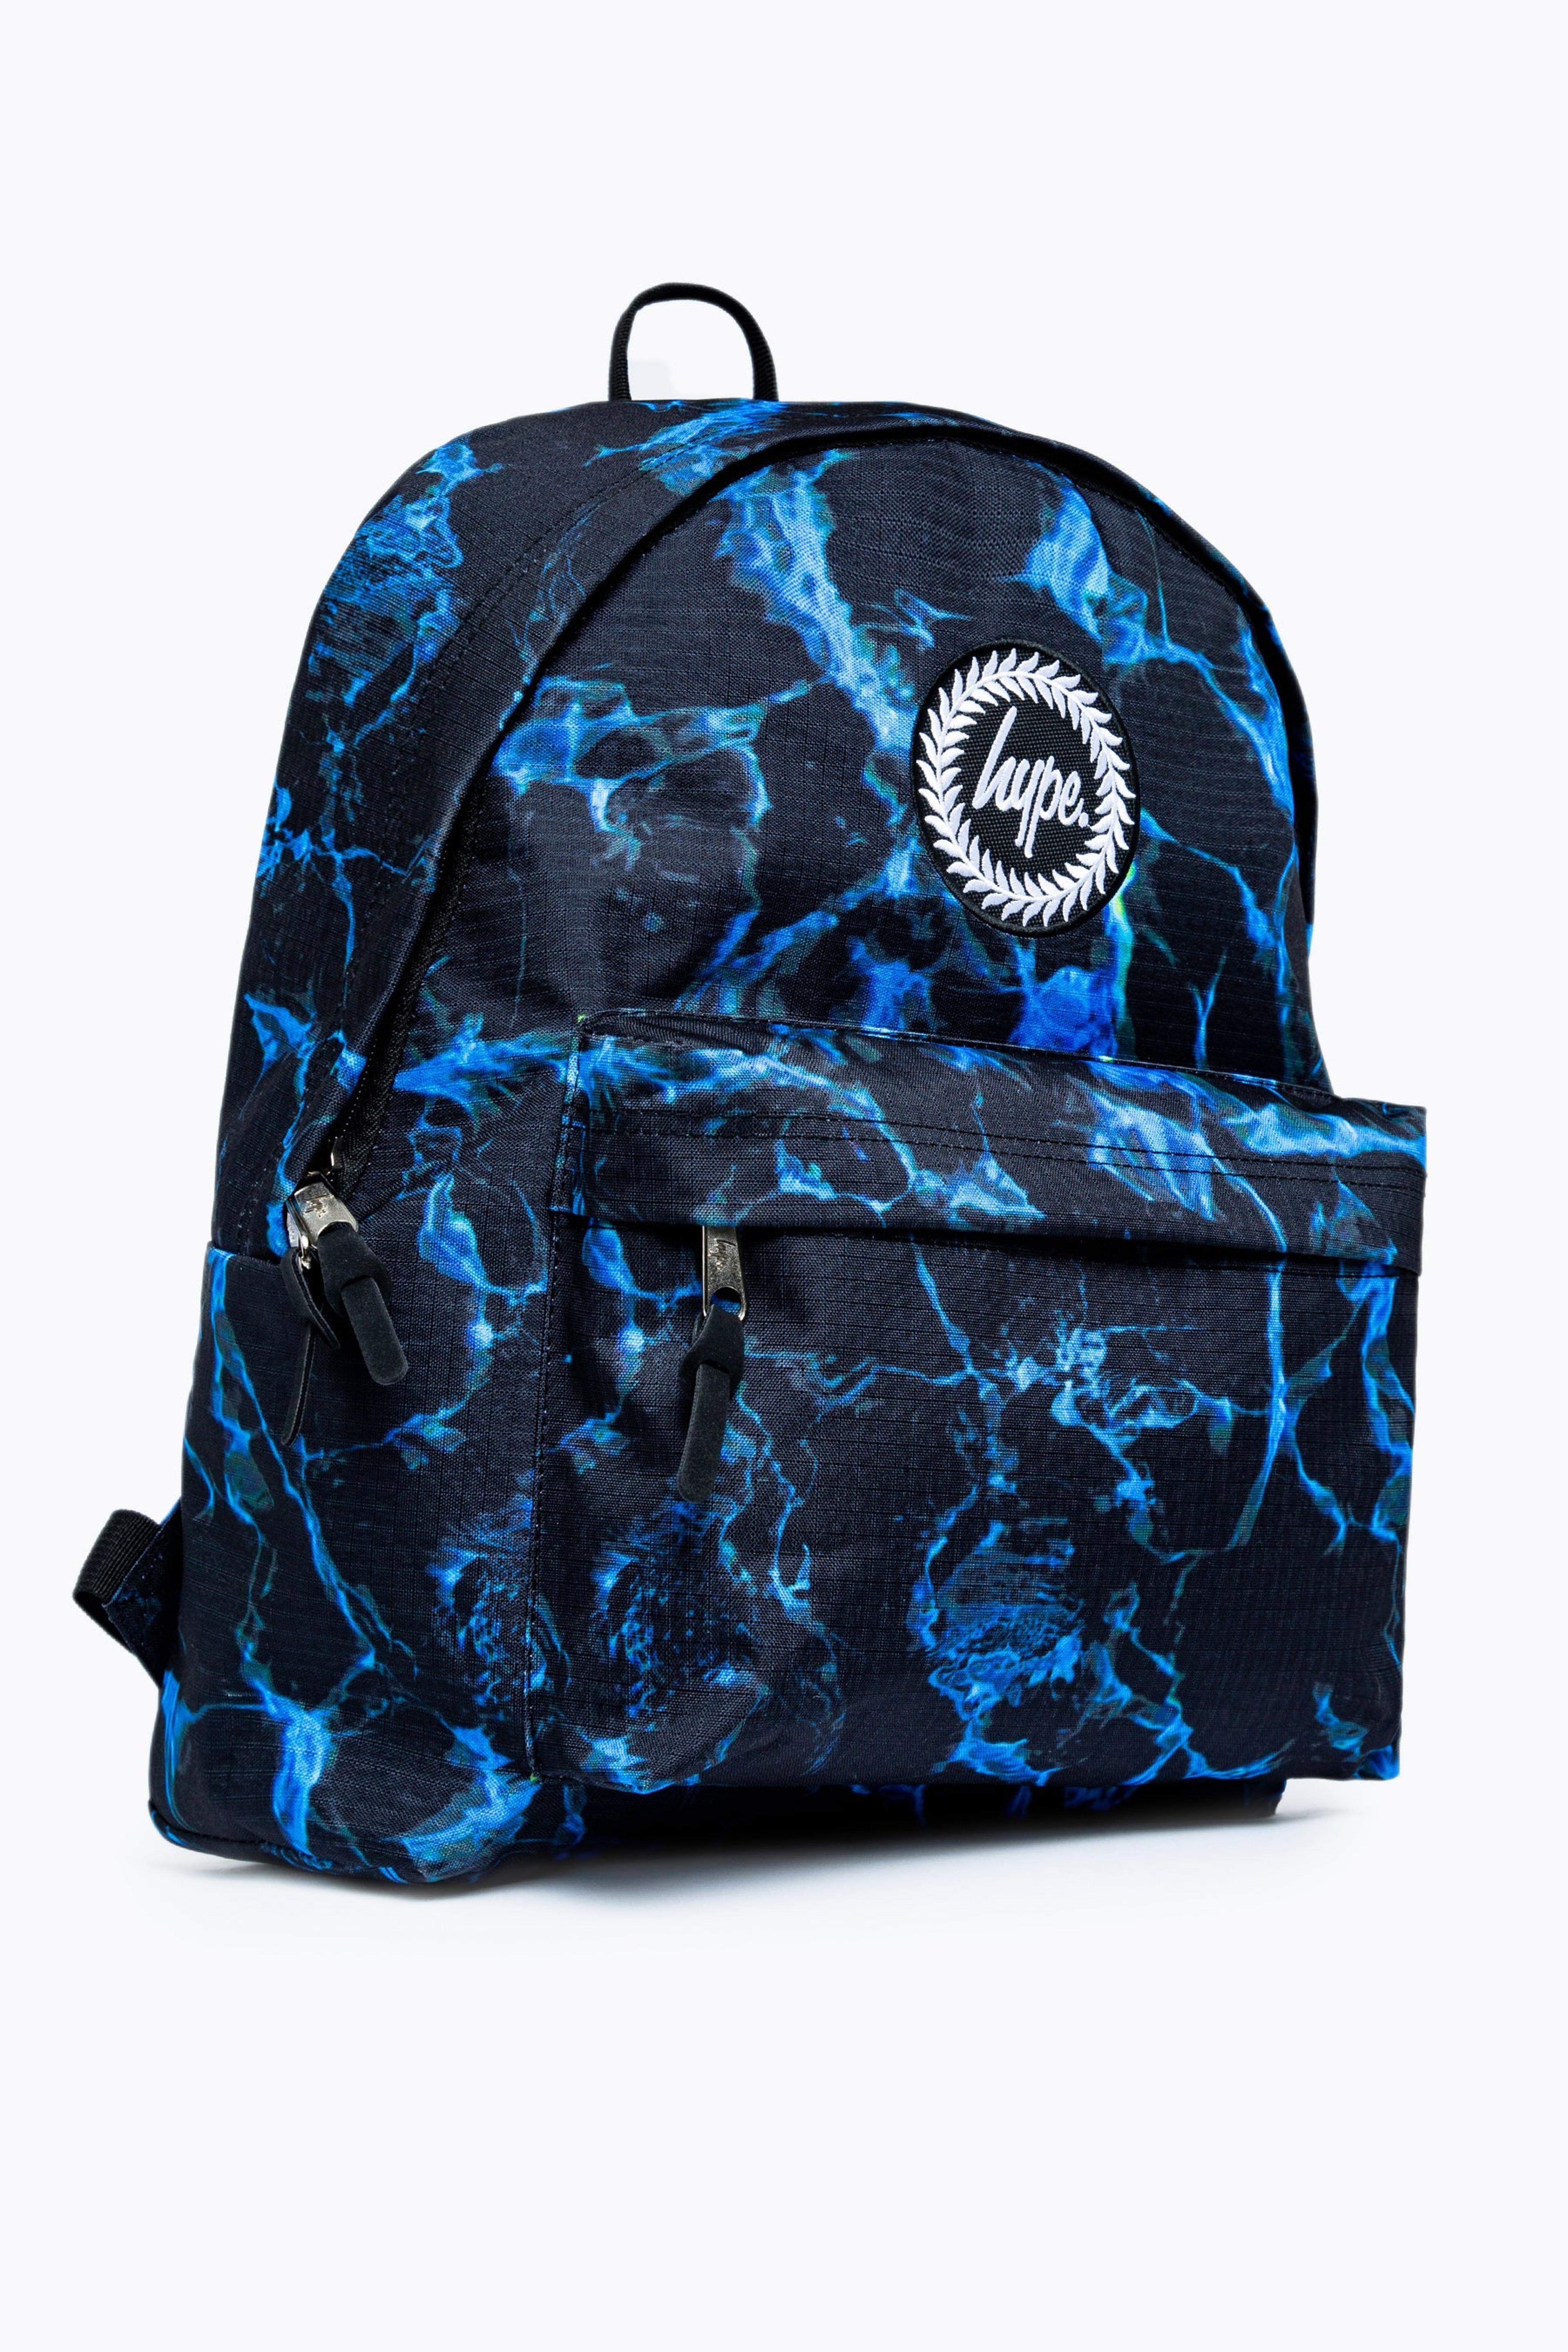 Alternate View 1 of HYPE X-RAY POOL BACKPACK